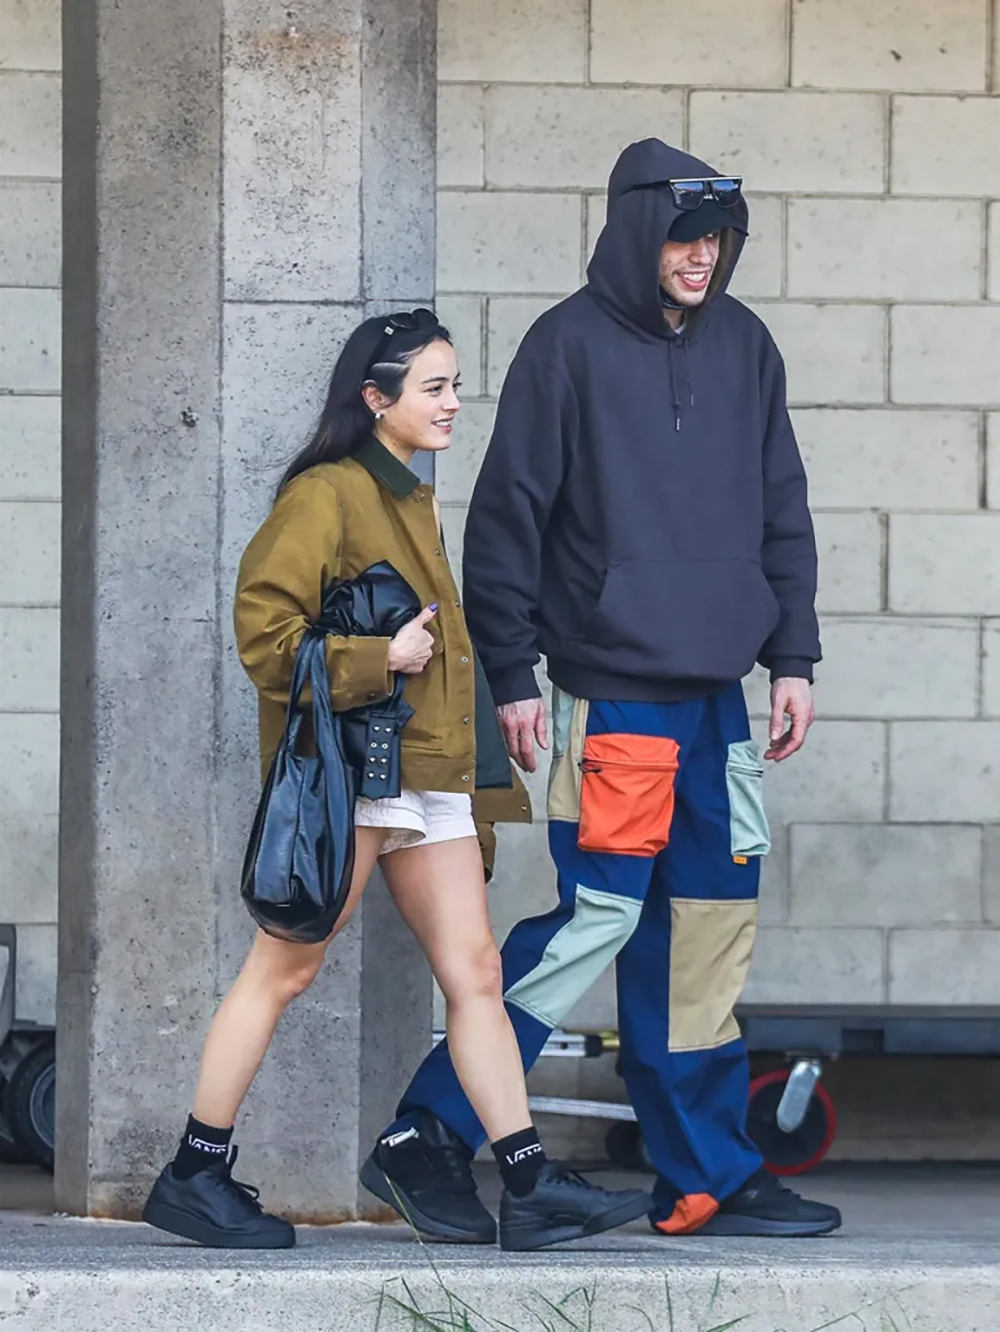 Pete Davidson and Chase Sui Wonders were spotted holding hands as they arrived at the Maui airport in January 2023. The couple met on the set of the movie, ‘Bodies Bodies Bodies’ in 2021 & they attended a New York Rangers game together in December 2022.